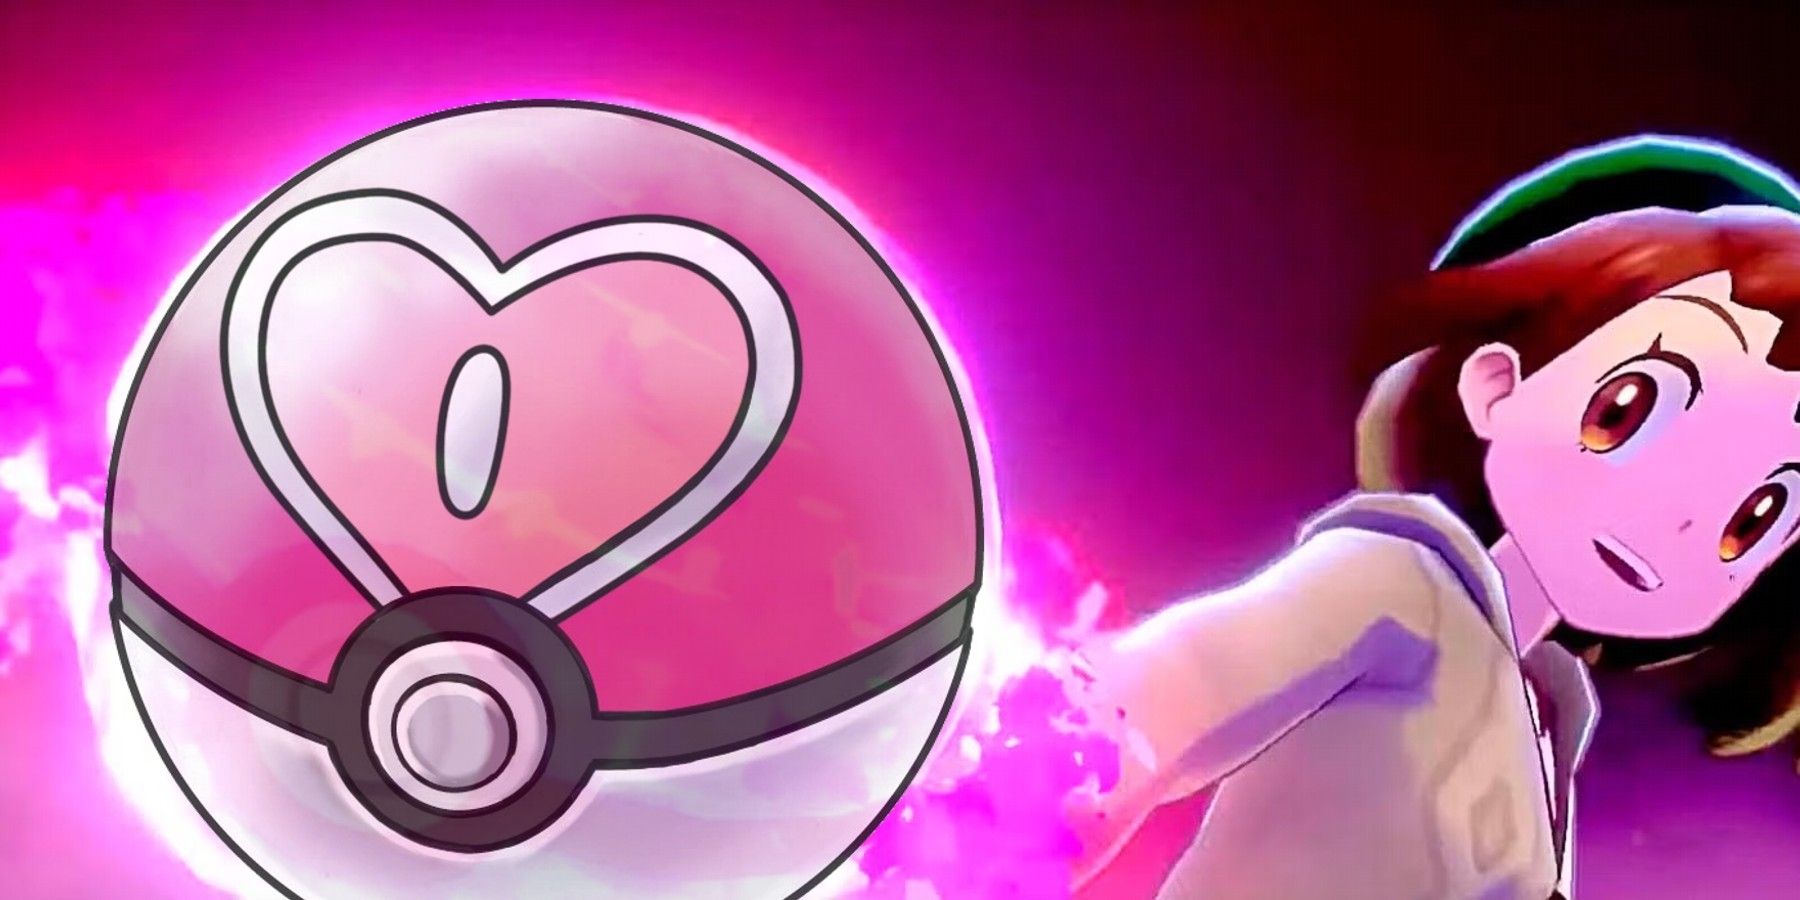 Official Pokemon Love Ball Replica Goes on Sale